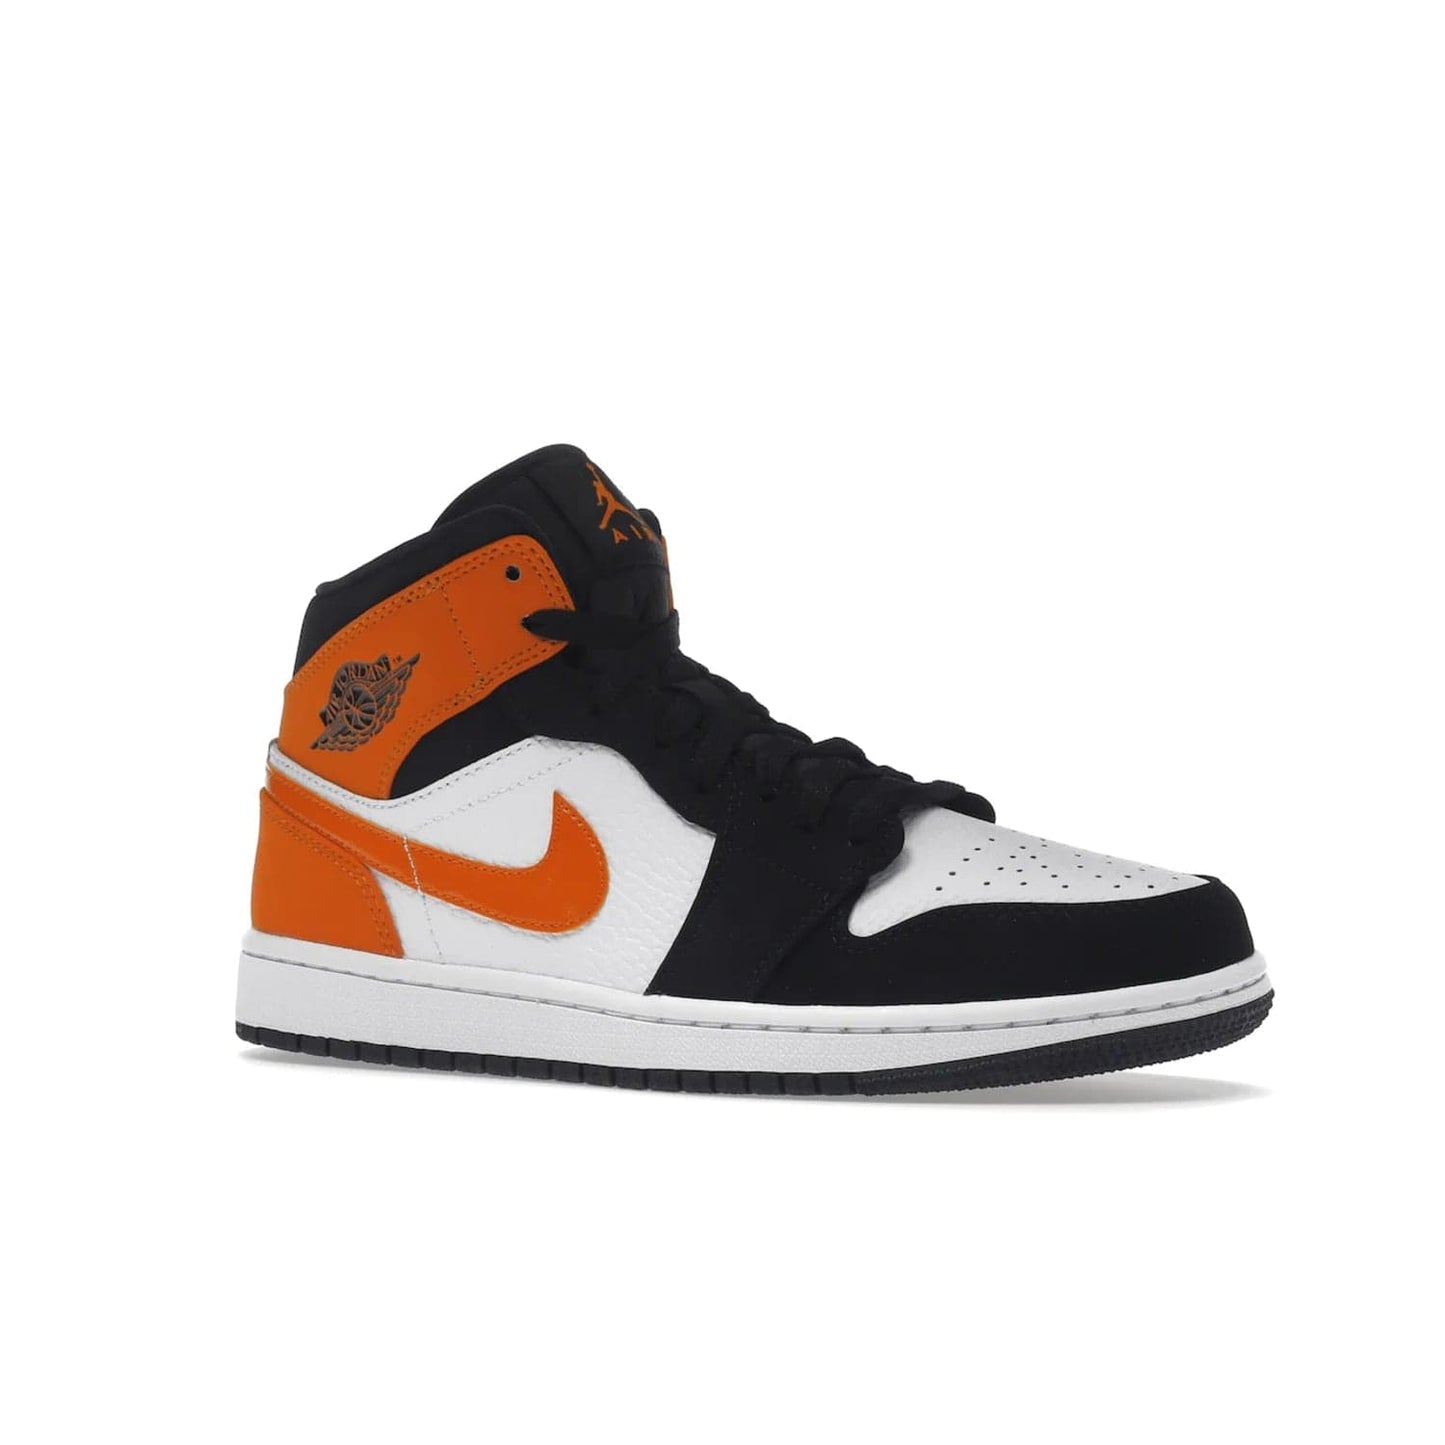 Jordan 1 Mid Shattered Backboard - Image 4 - Only at www.BallersClubKickz.com - The Air Jordan 1 Mid Shattered Backboard offers a timeless Black/White-Starfish colorway. Classic Swoosh logo and AJ insignia plus a shatterd backboard graphic on the insole. Get your pair today!